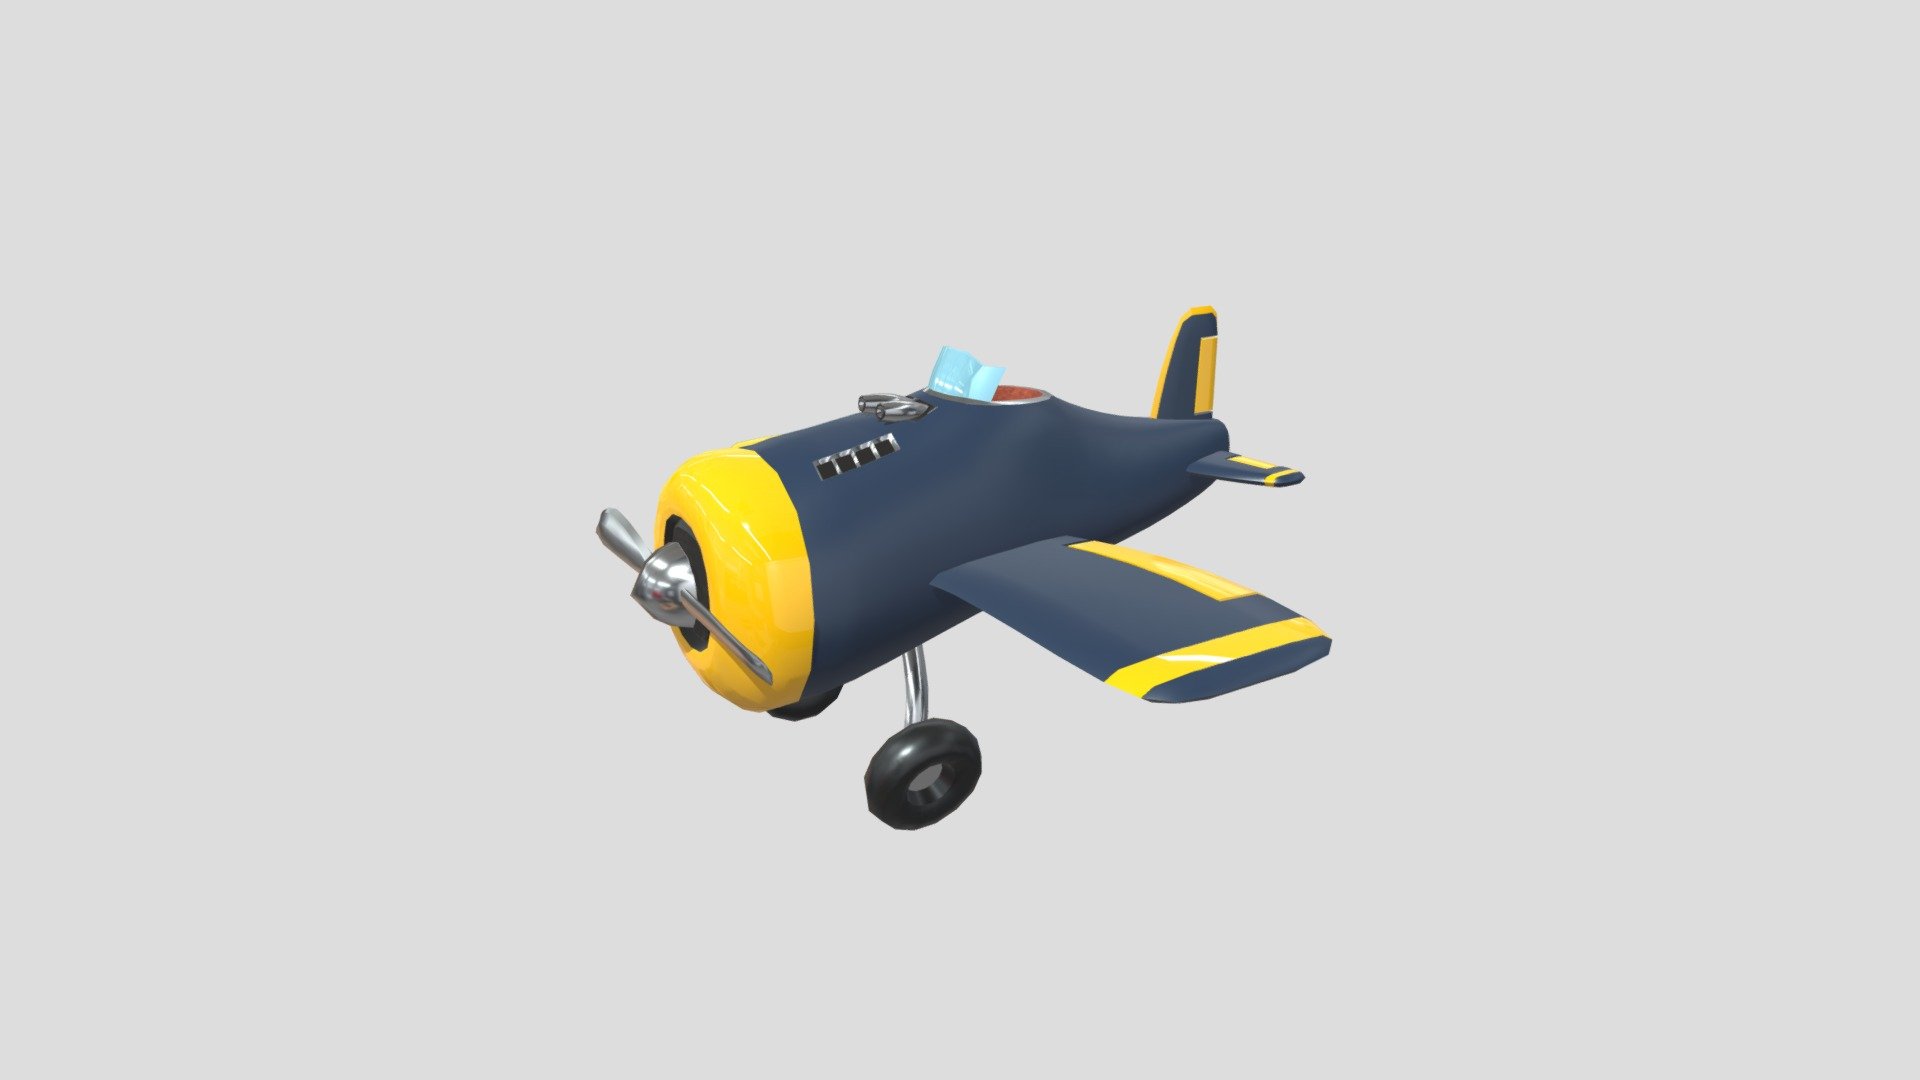 3d Plane - Cute Cartoon Stylized
Model by Nenad Resanovic
Textures by Nenad Resanovic

You whant to buy this model?
Feel free to contact me on nenadresanovic85@gmail.com - 3d Plane - Aircraft - Cute - Cartoon - Stylized - 3D model by SpeechGlitch 3d model